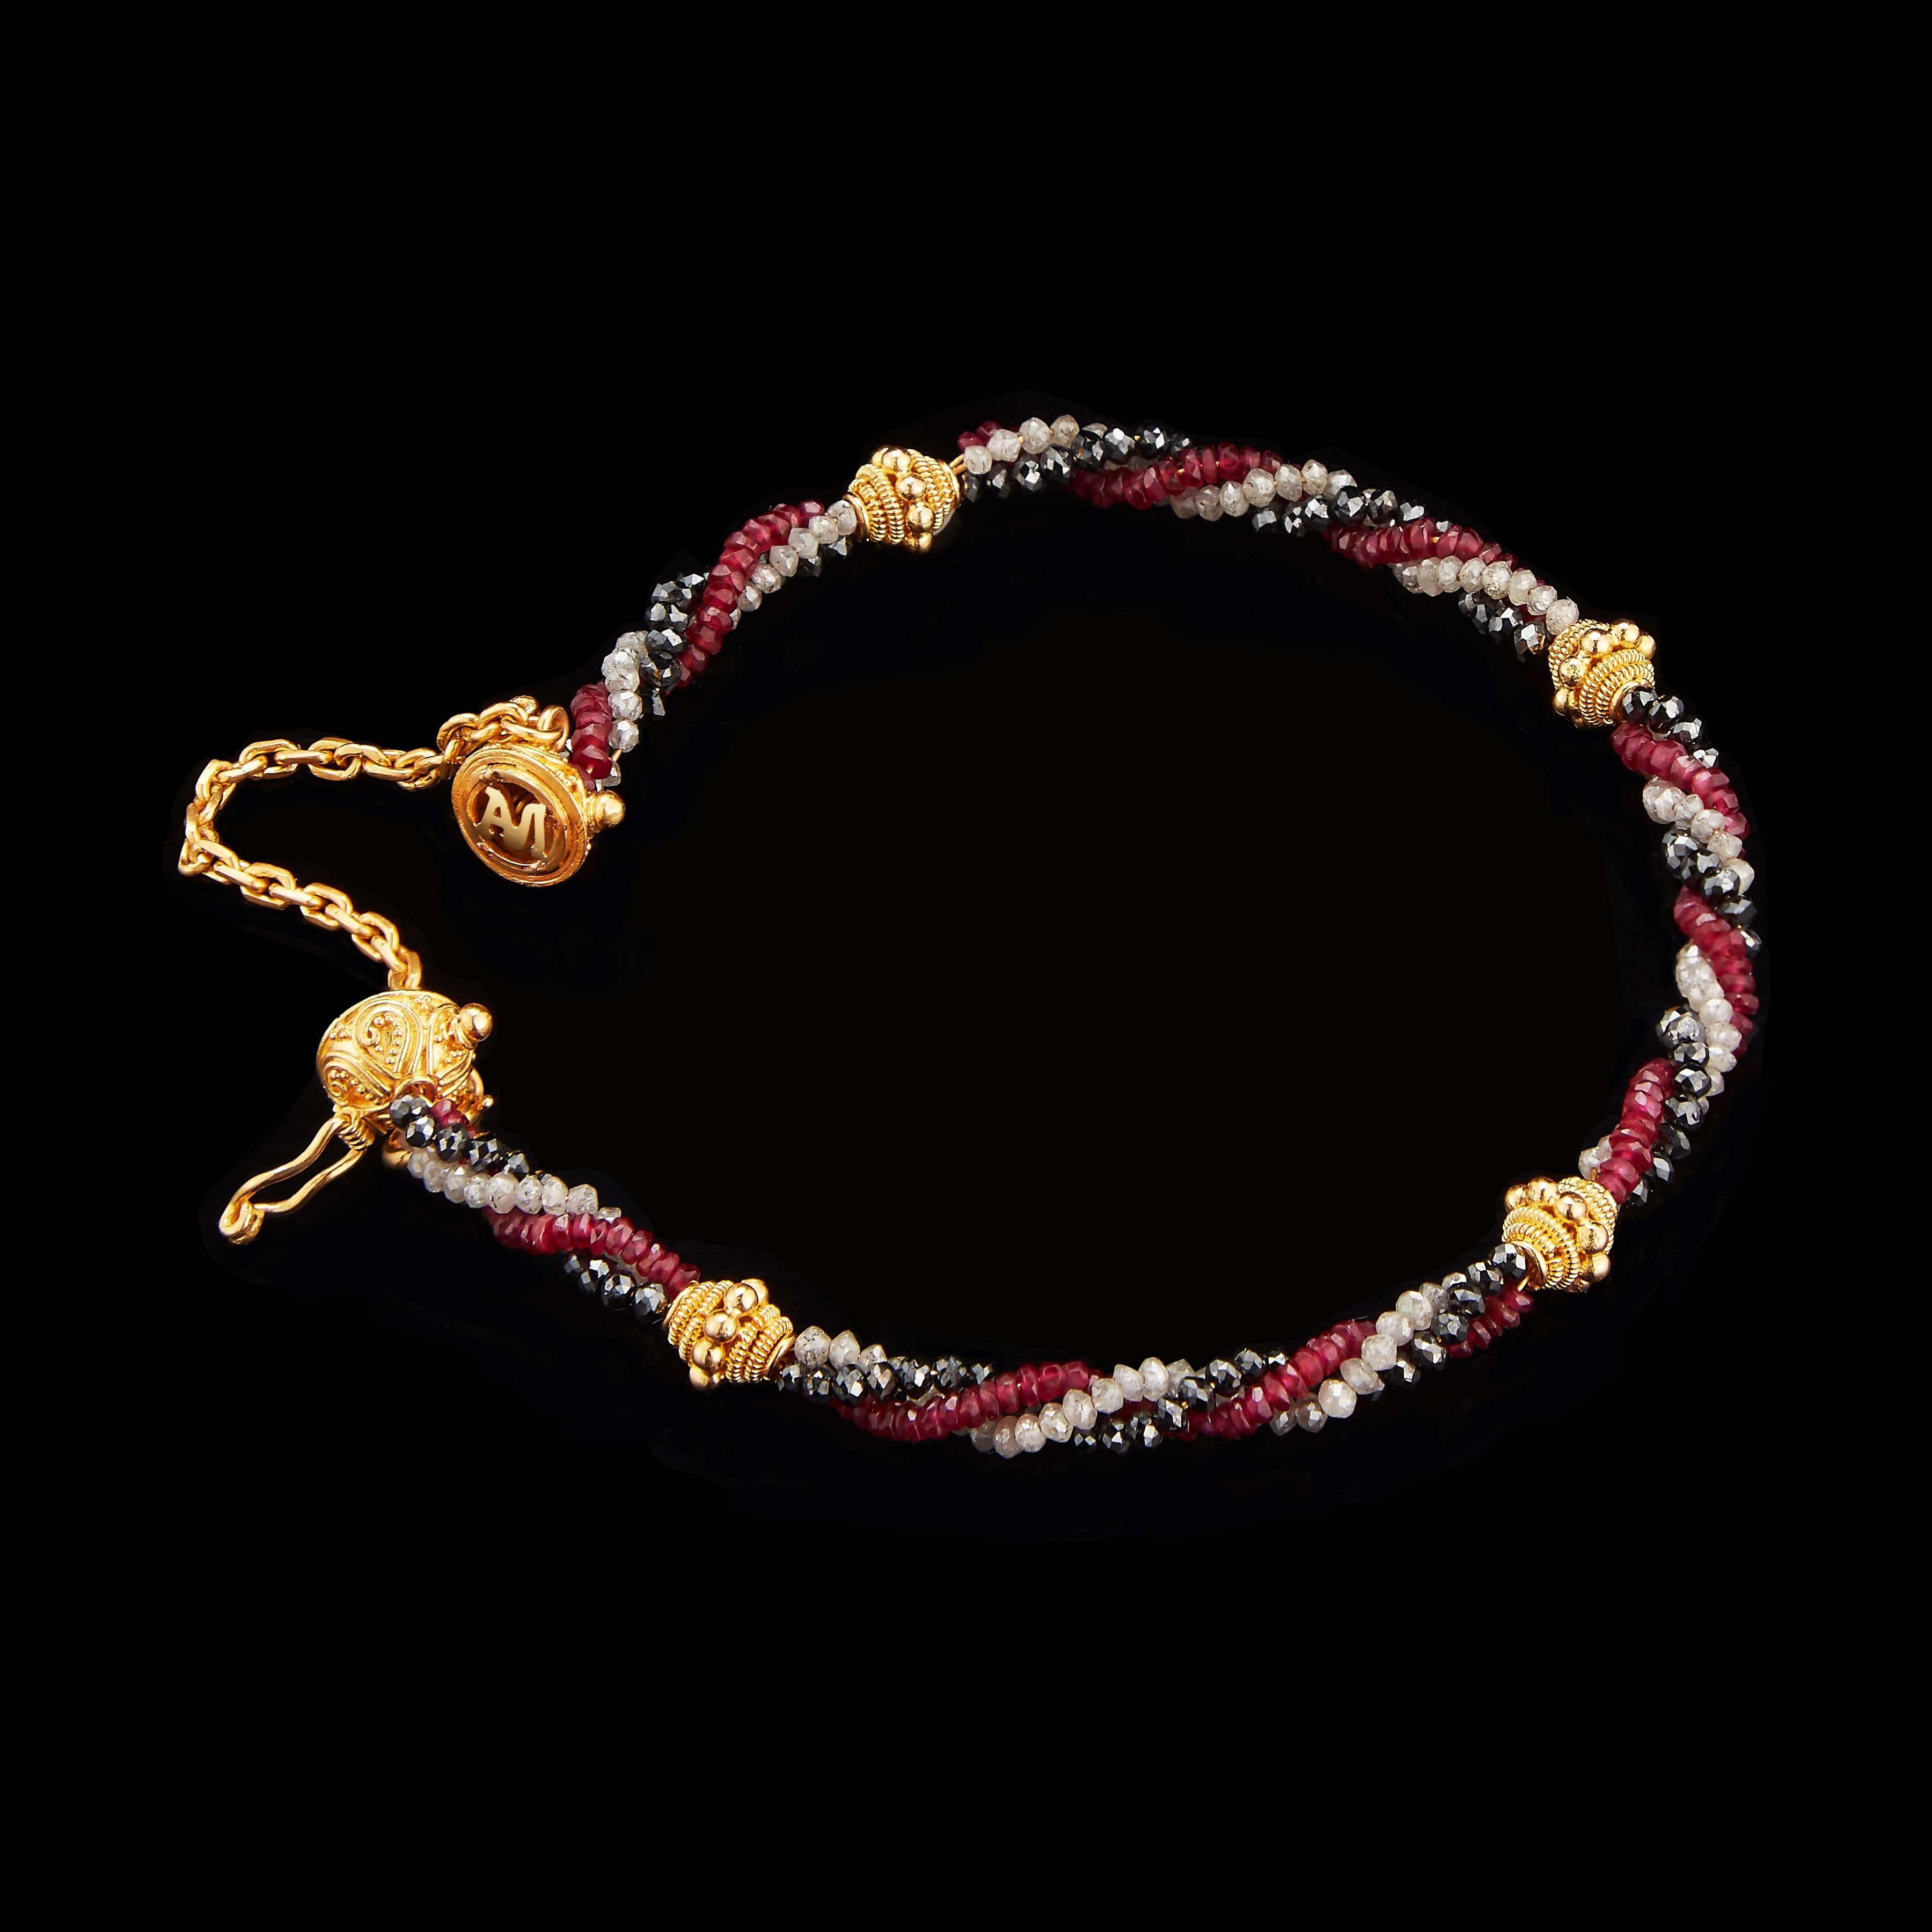 *Please contact us for more information on this piece or on creating your own Alexandra Mor custom Design. 

This bracelet features 1.31  carats of black Diamond Beads, 1.21  carats of Ruby Beads and .72 carats of white Diamond Beads, woven in